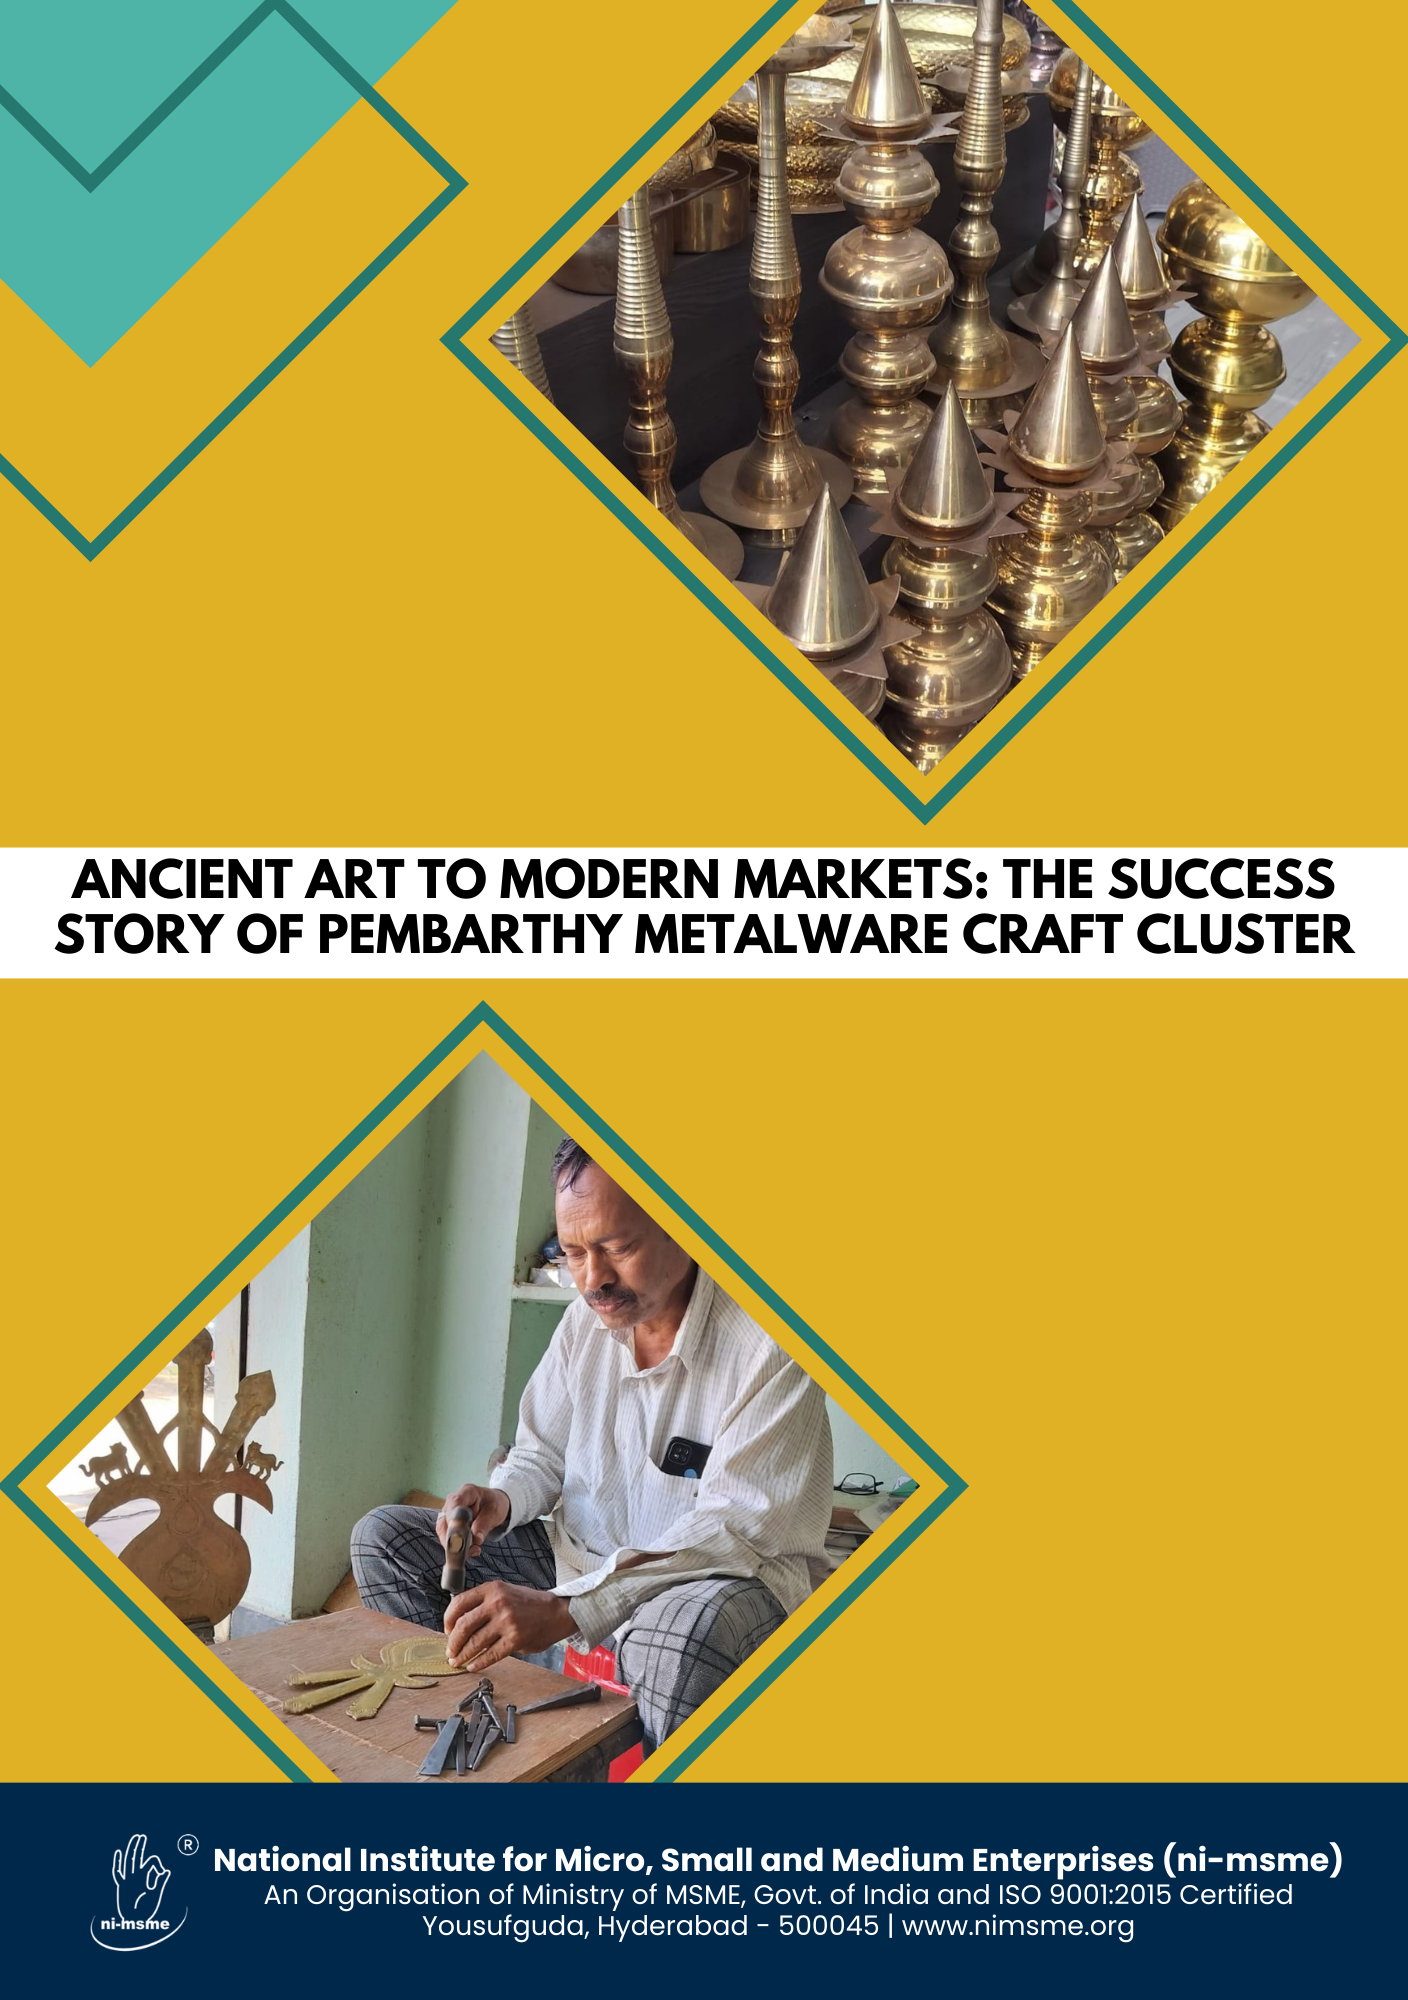 Ancient Art to Modern Markets: The Success Story of Pembarthy Metalware Craft Cluster